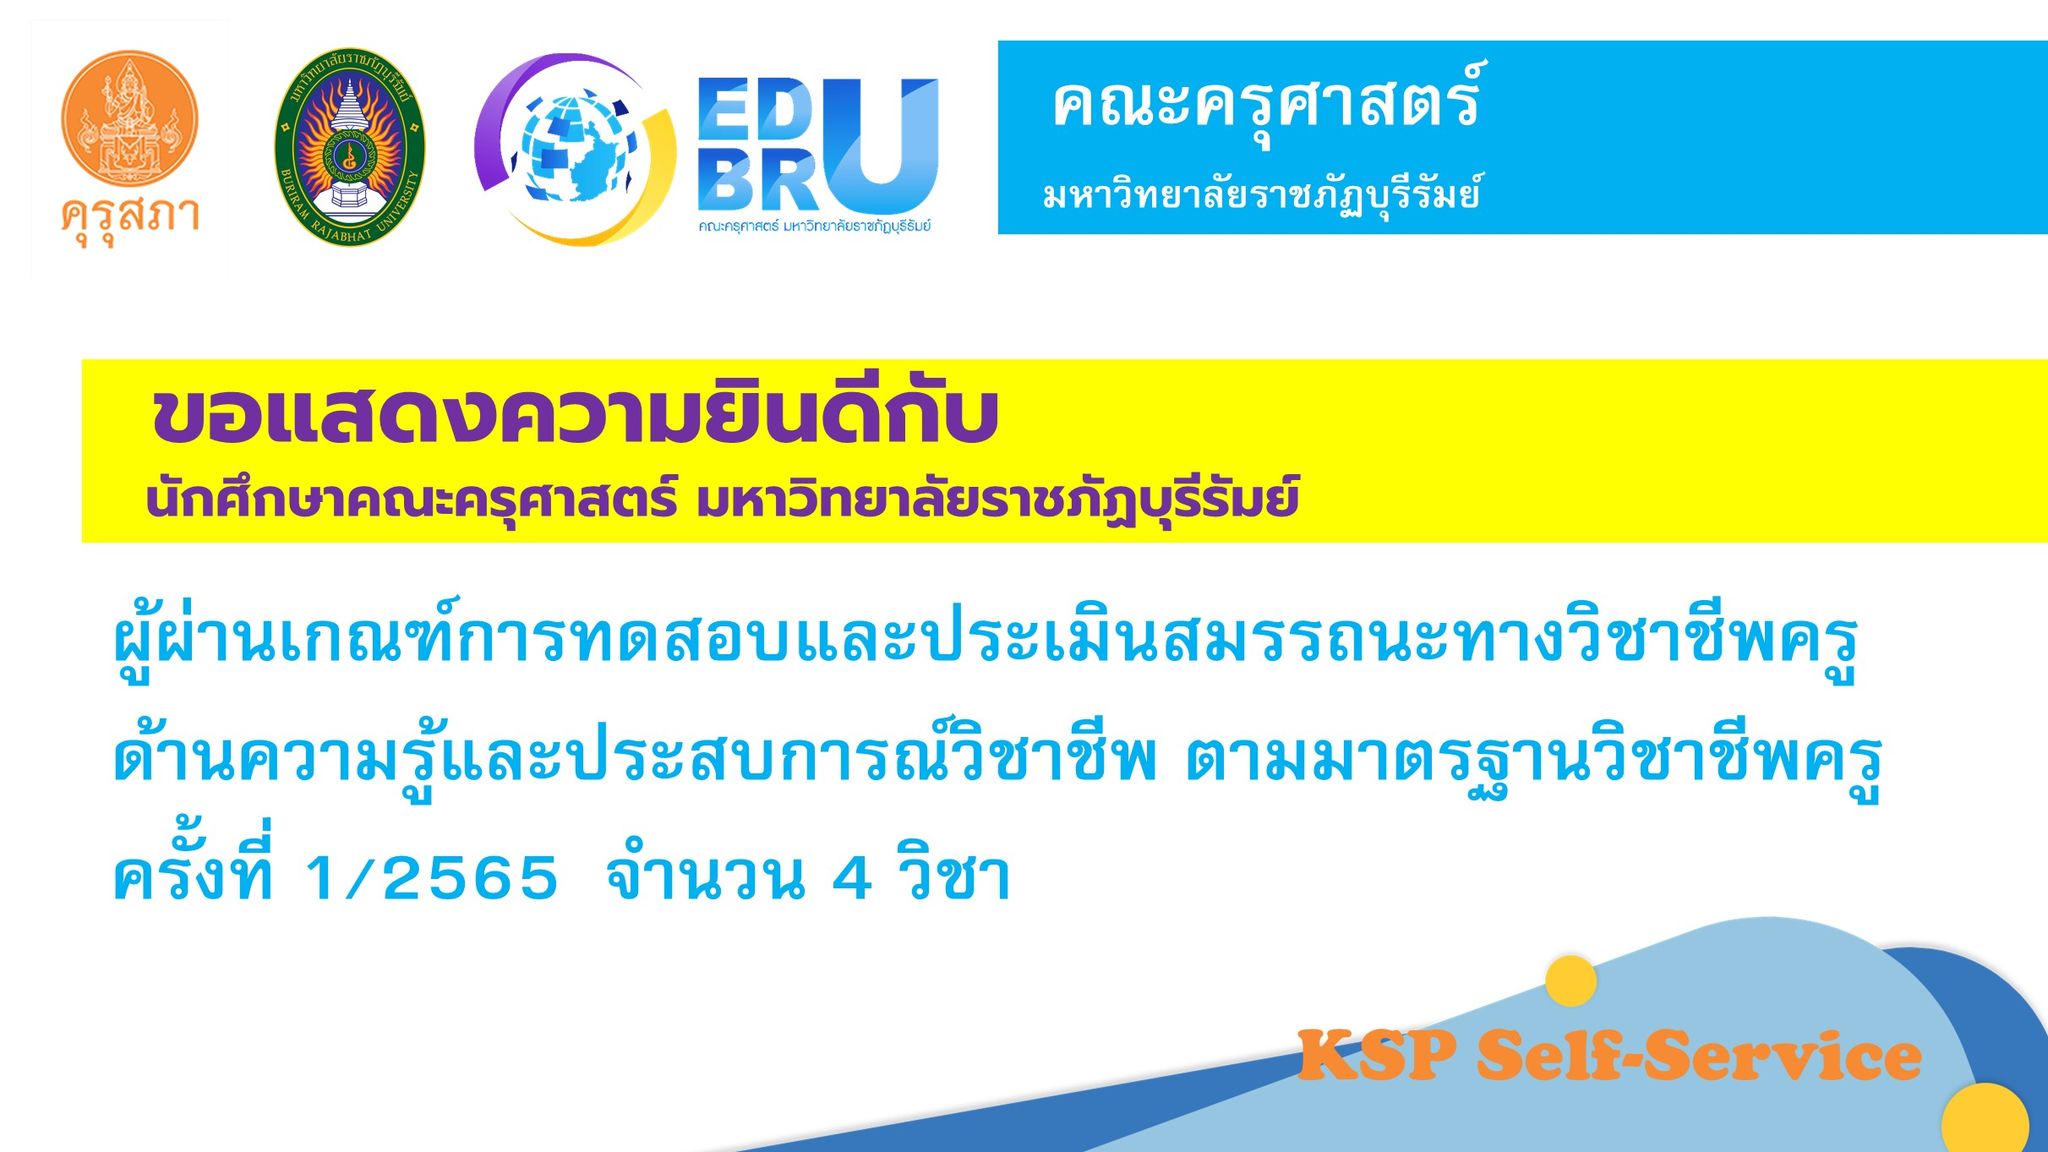 Congratulations to the students of the Faculty of Education Buriram Rajabhat University